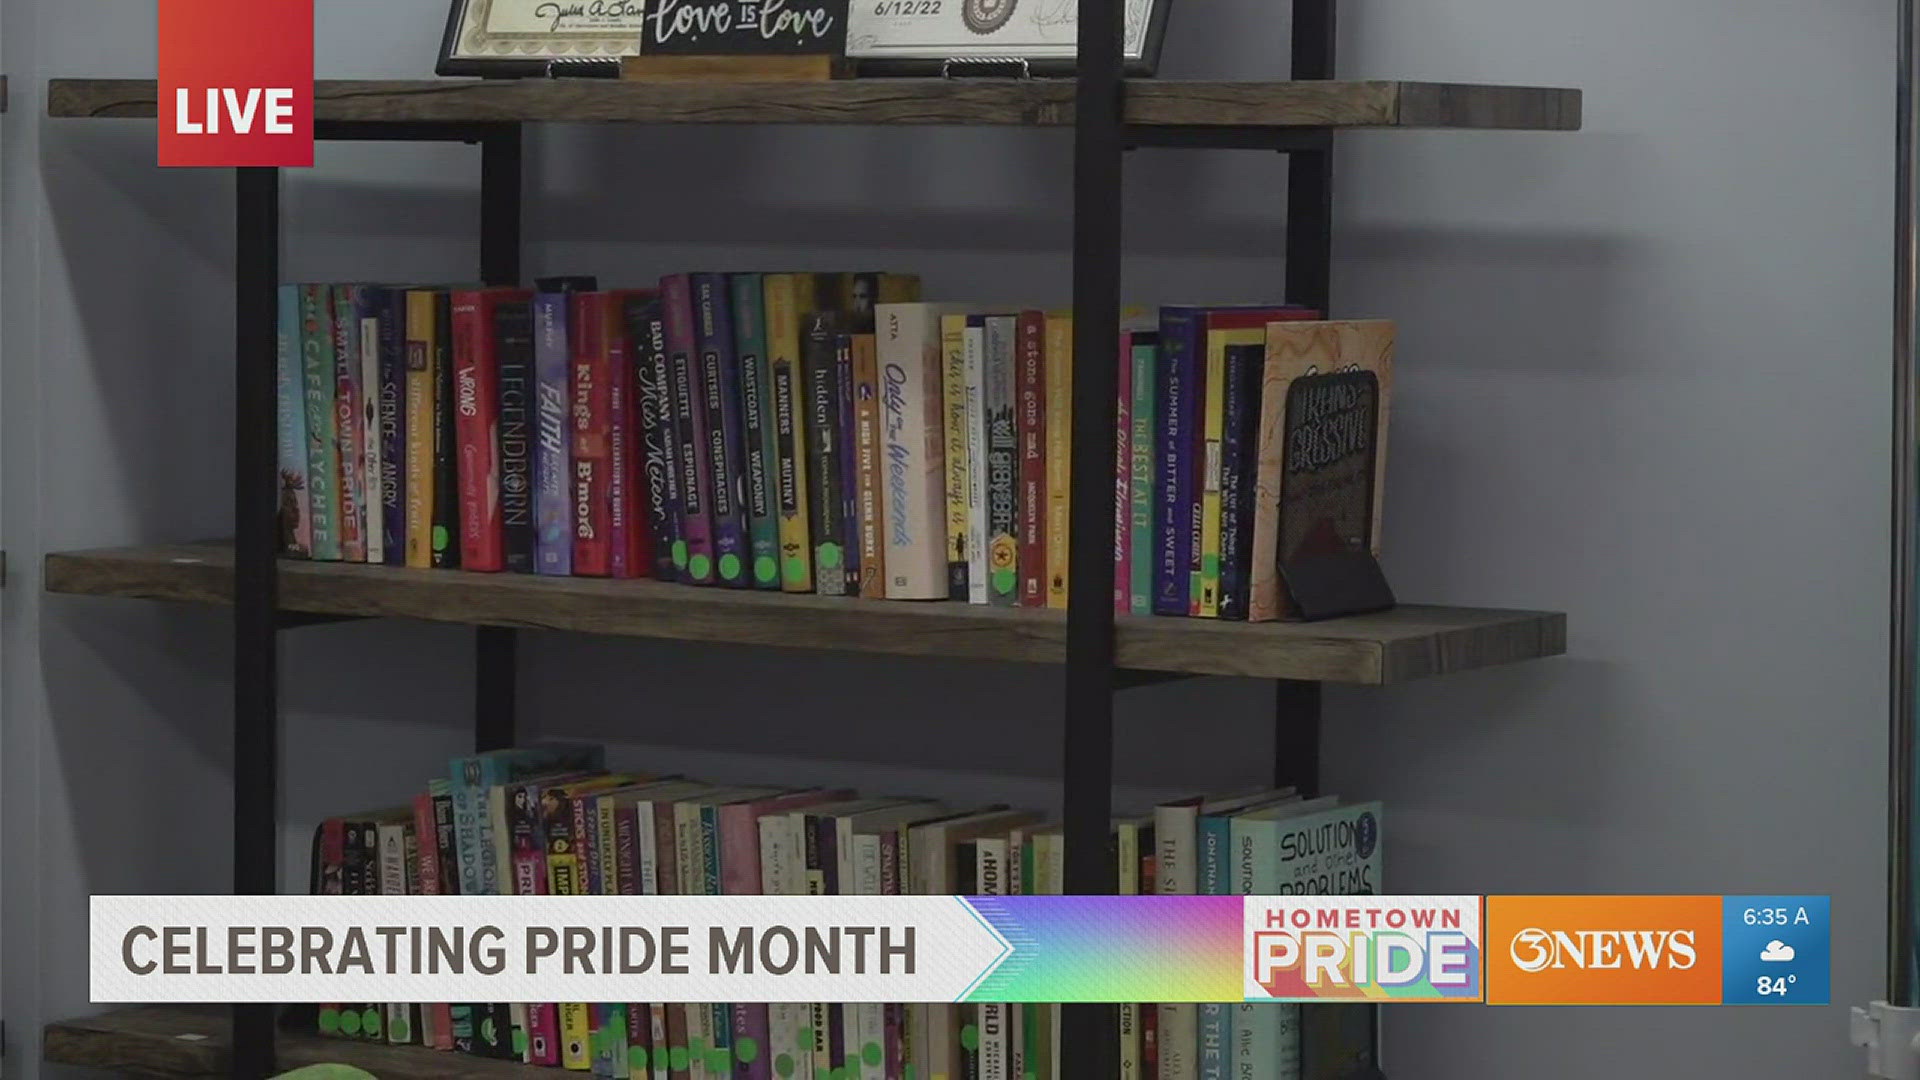 Are you looking for LGBTQ+ representation? Do you need educational resources? You can find it at the Coastal Bend Pride Center.